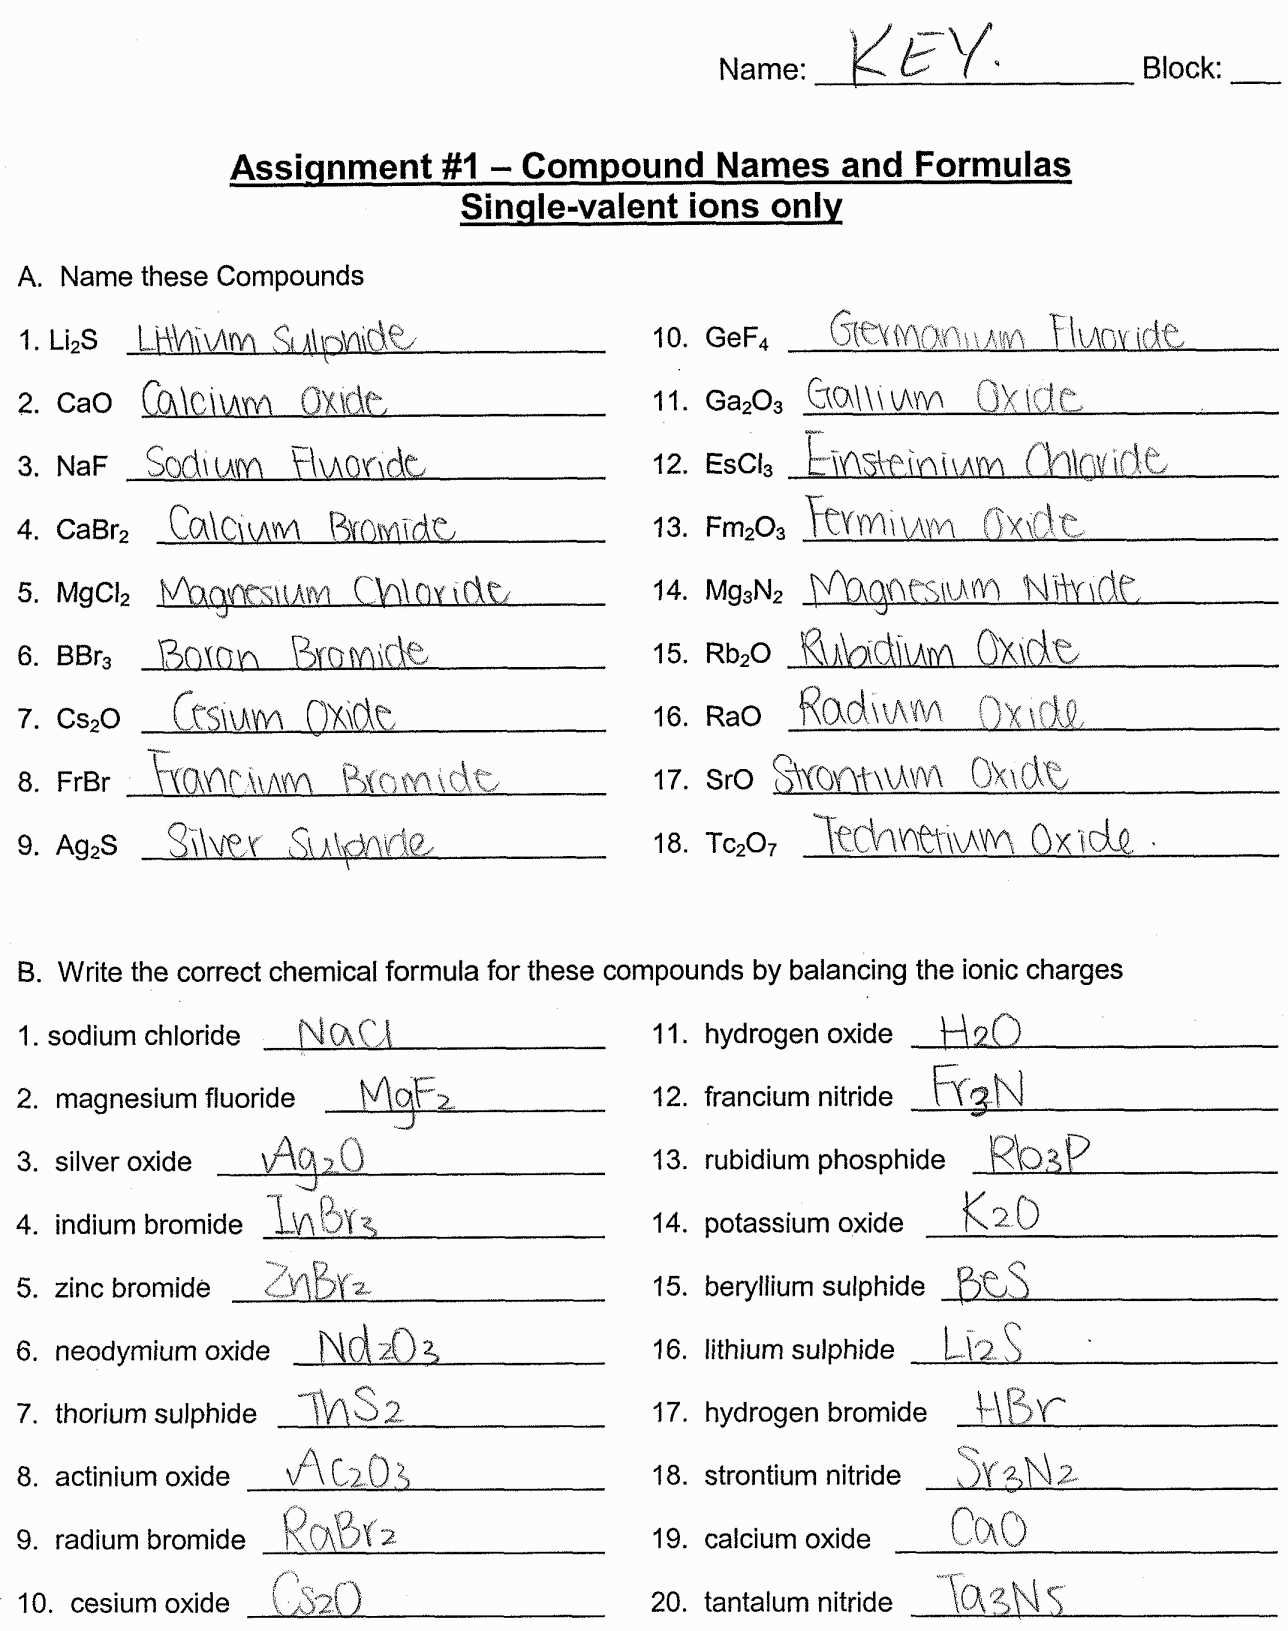 Ionic Compounds Worksheet Answers  Yooob In Ionic Compounds Worksheet Answers